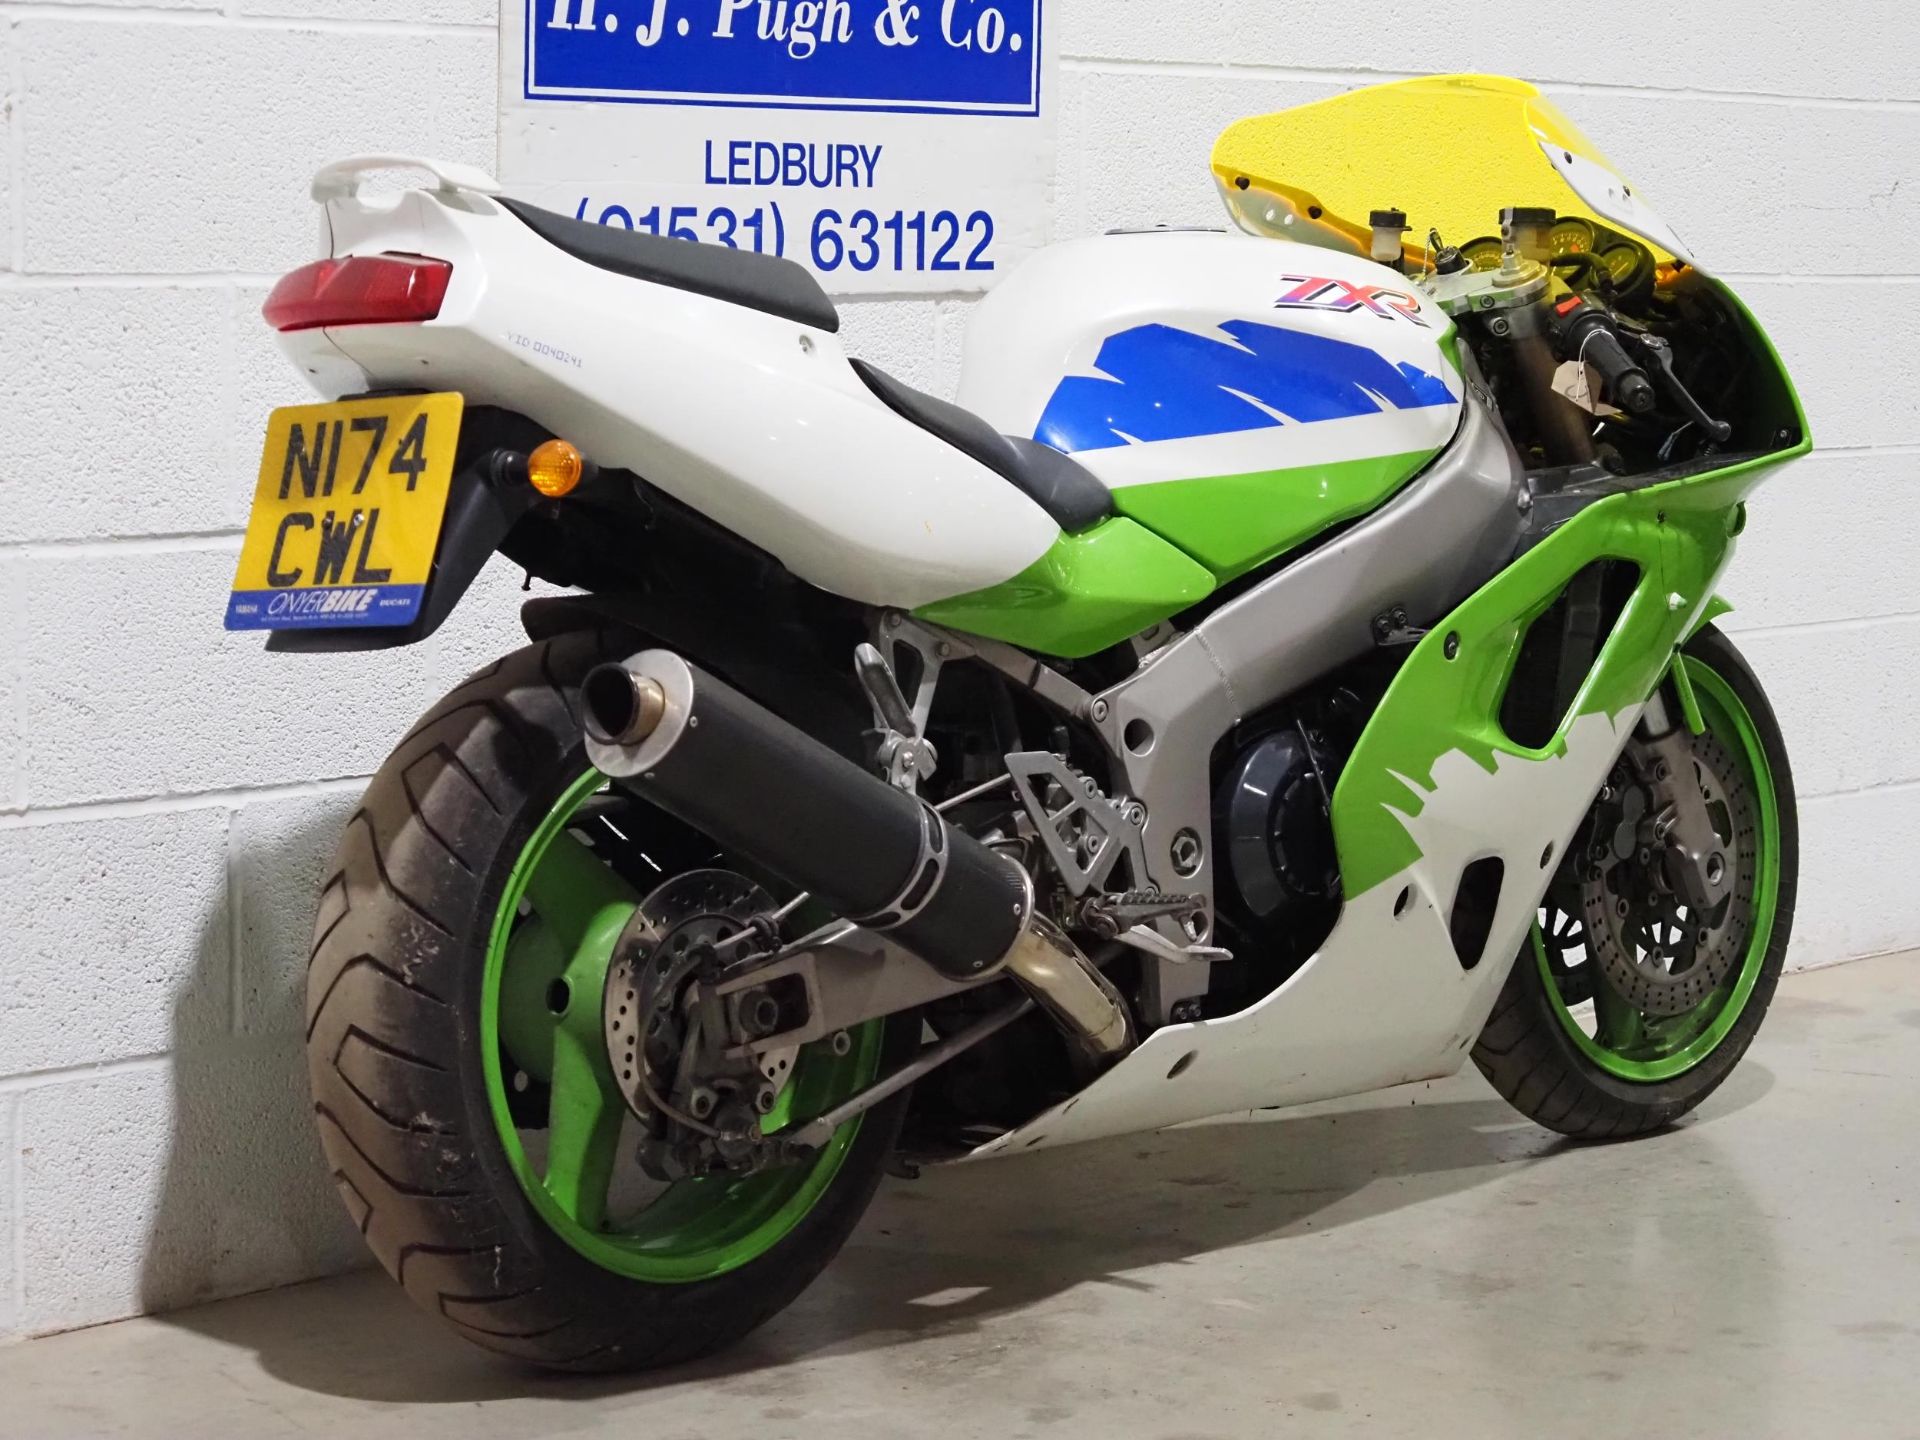 Kawasaki ZXR750 motorcycle. 1995. 749cc. Runs and rides. Fitted with carbon exhaust and stage 2 dyno - Image 3 of 6